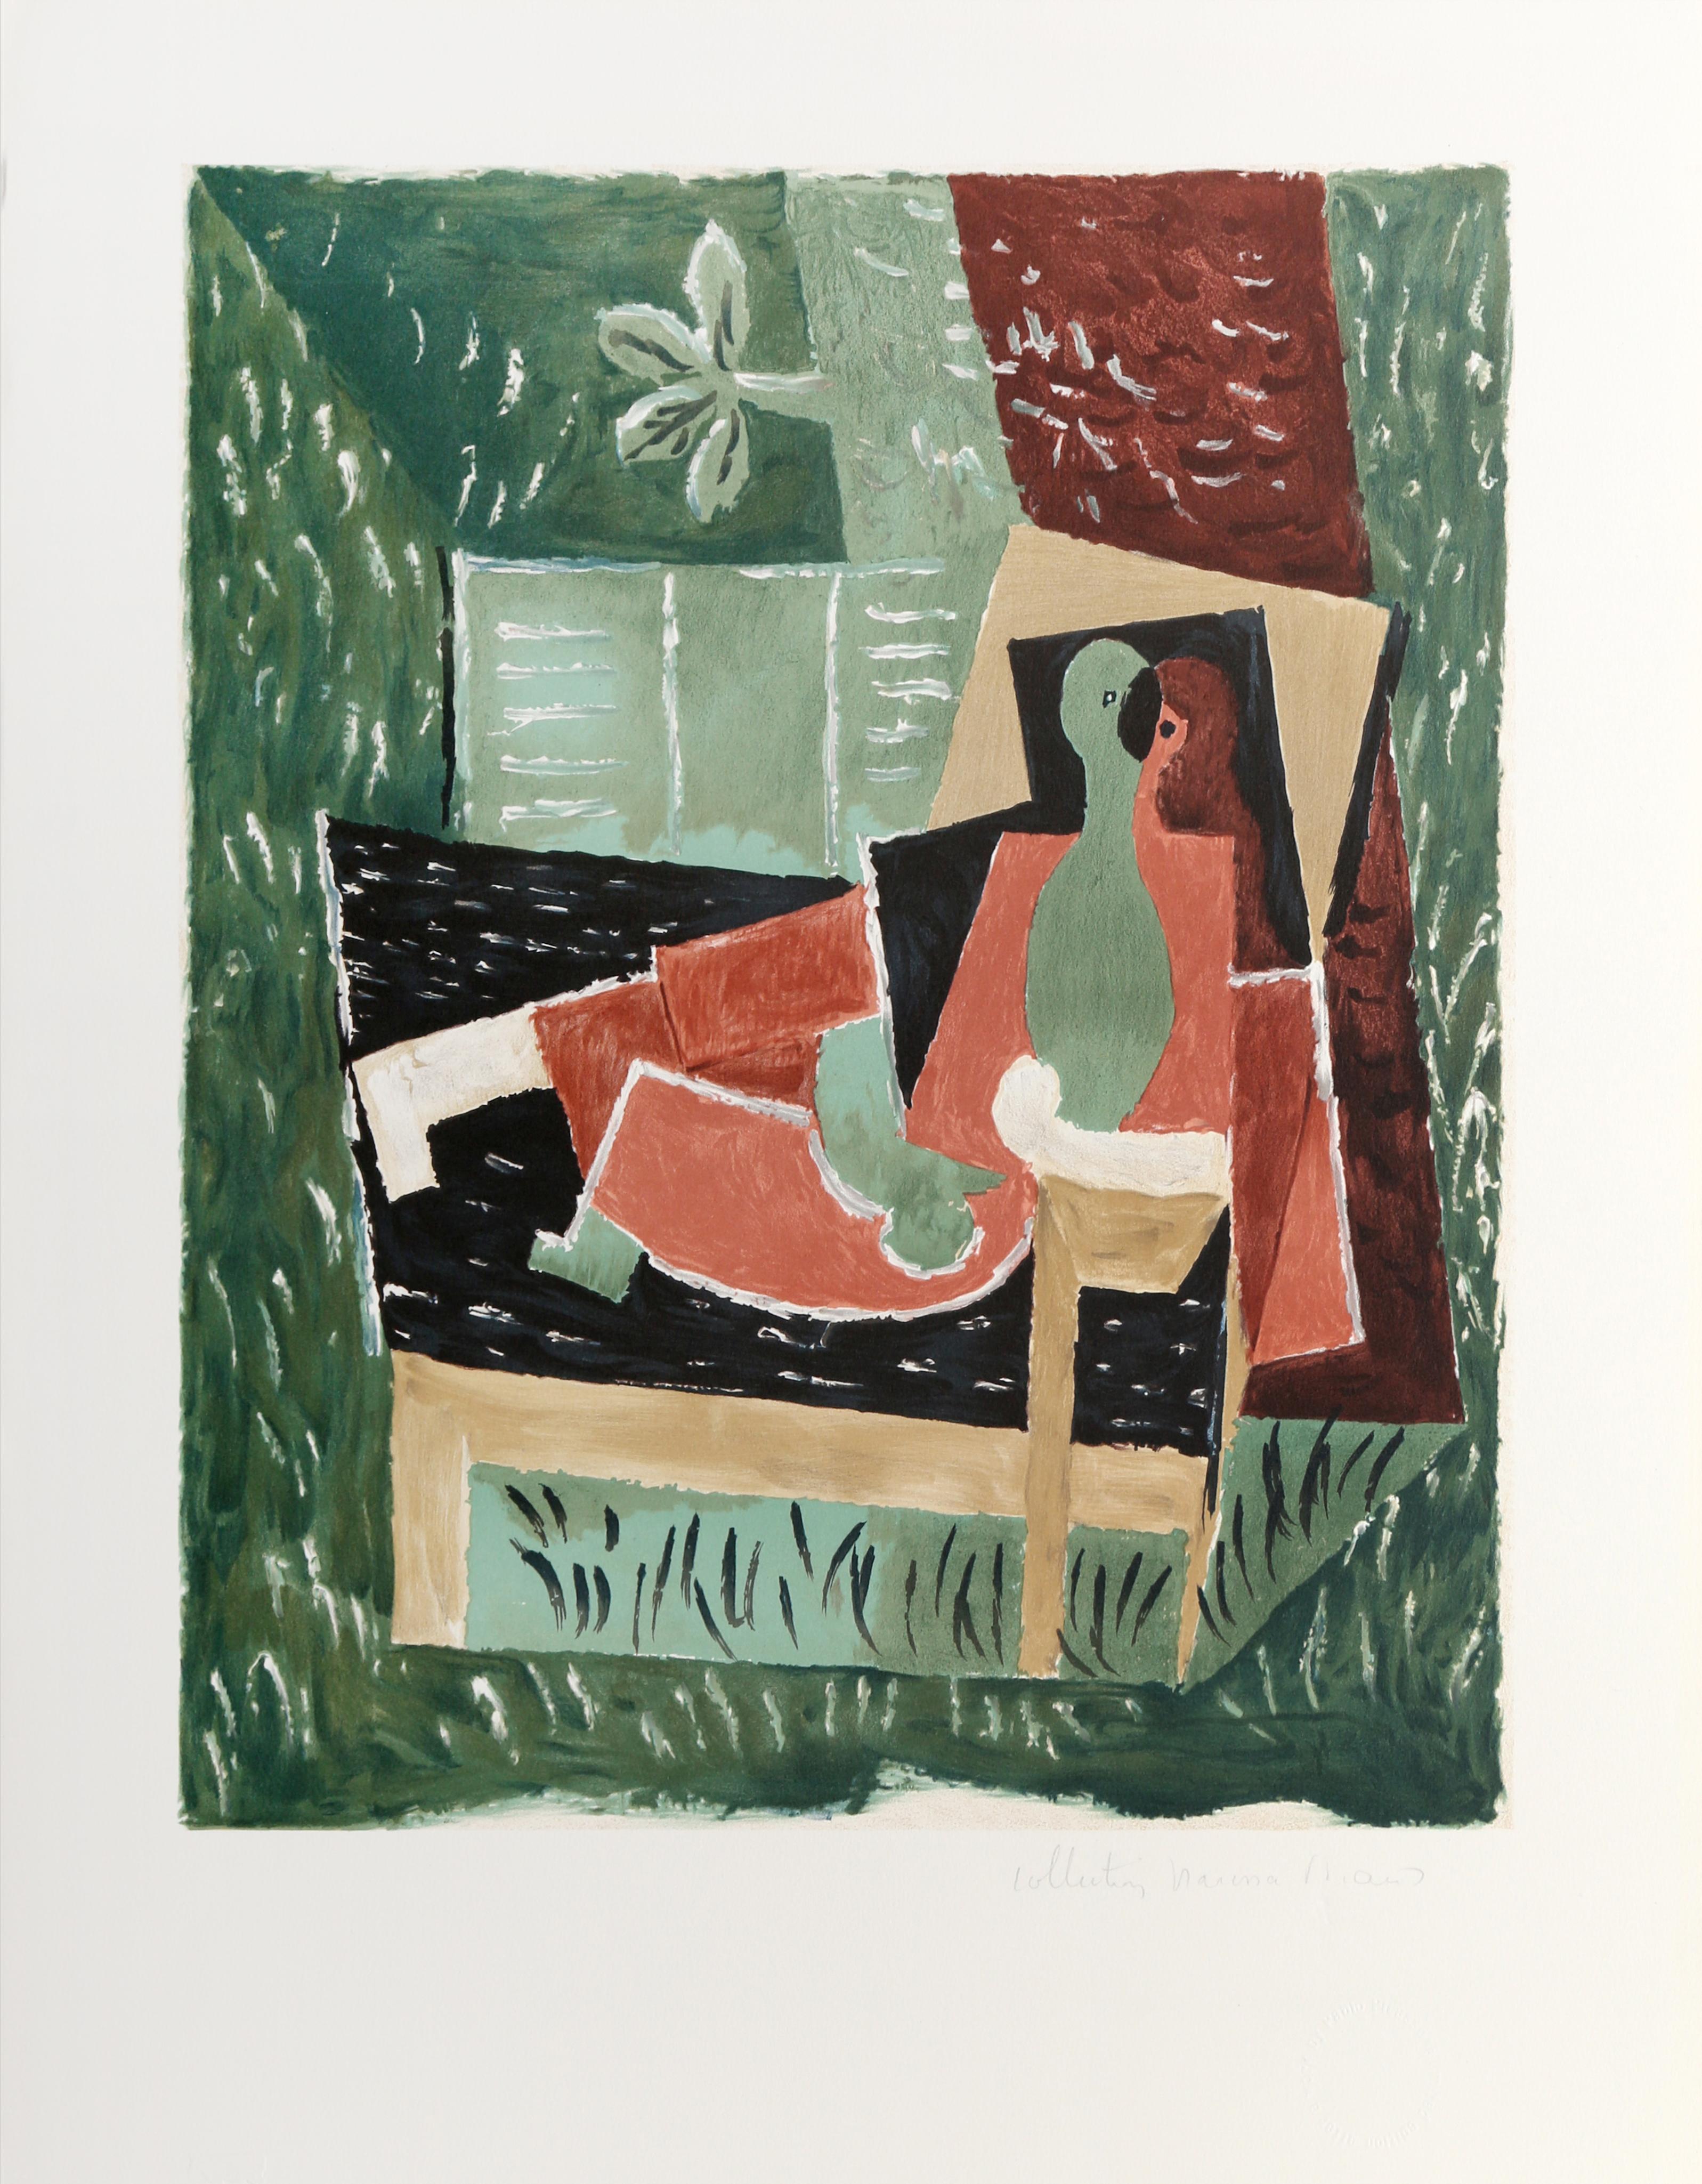 Set against the green background, the geometric figure in this Pablo Picasso print is comprised of numerous rectangular shapes that overlap one another in the typical Cubist fashion. A lithograph from the Marina Picasso Estate Collection after the